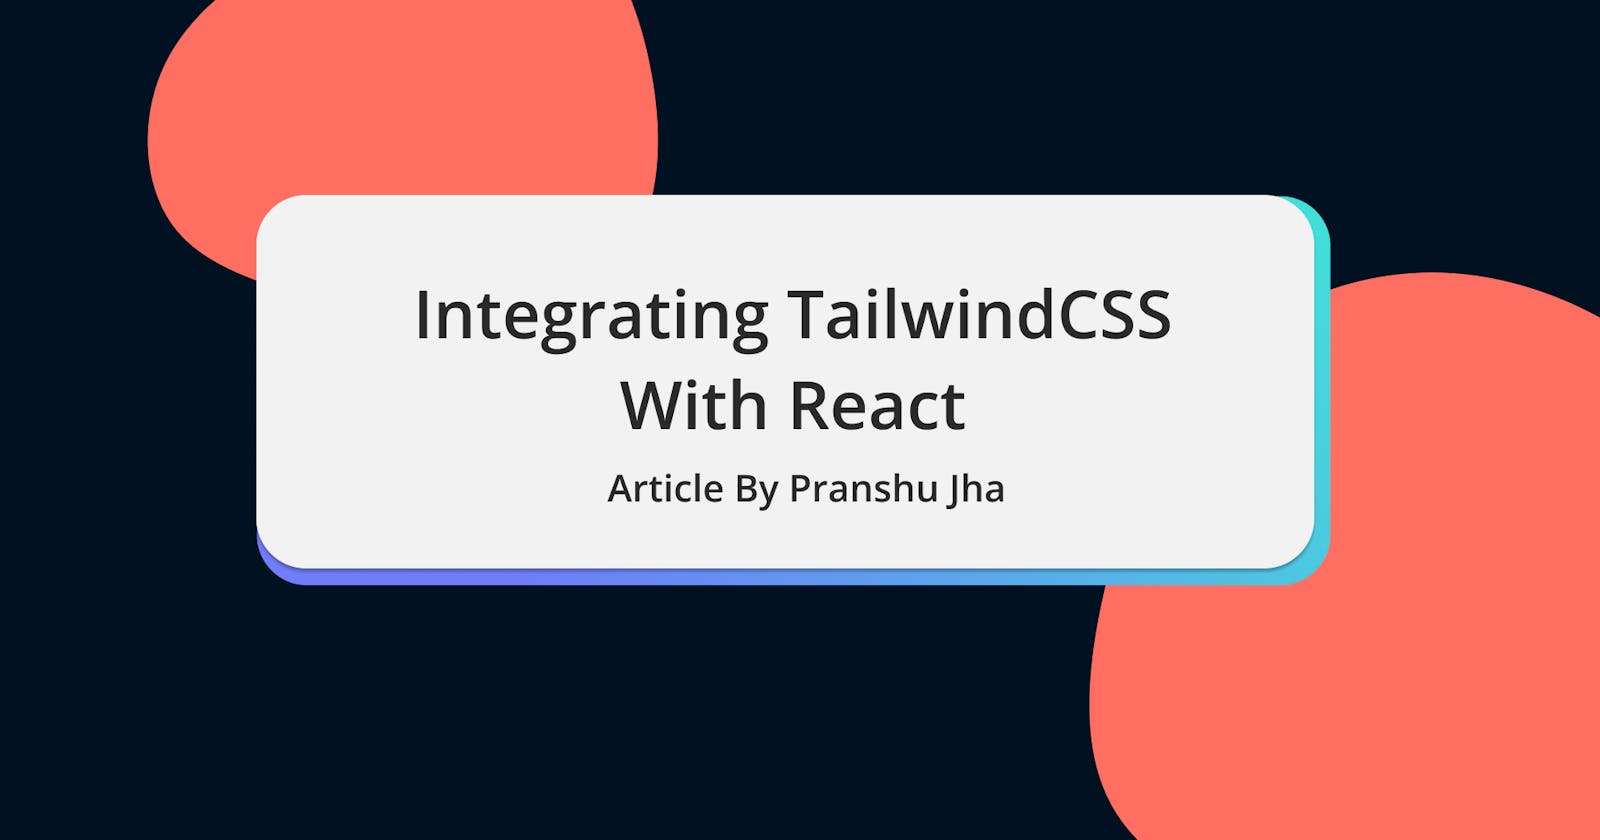 Cover Image for Integrating TailwindCSS with React in 3 simple steps!